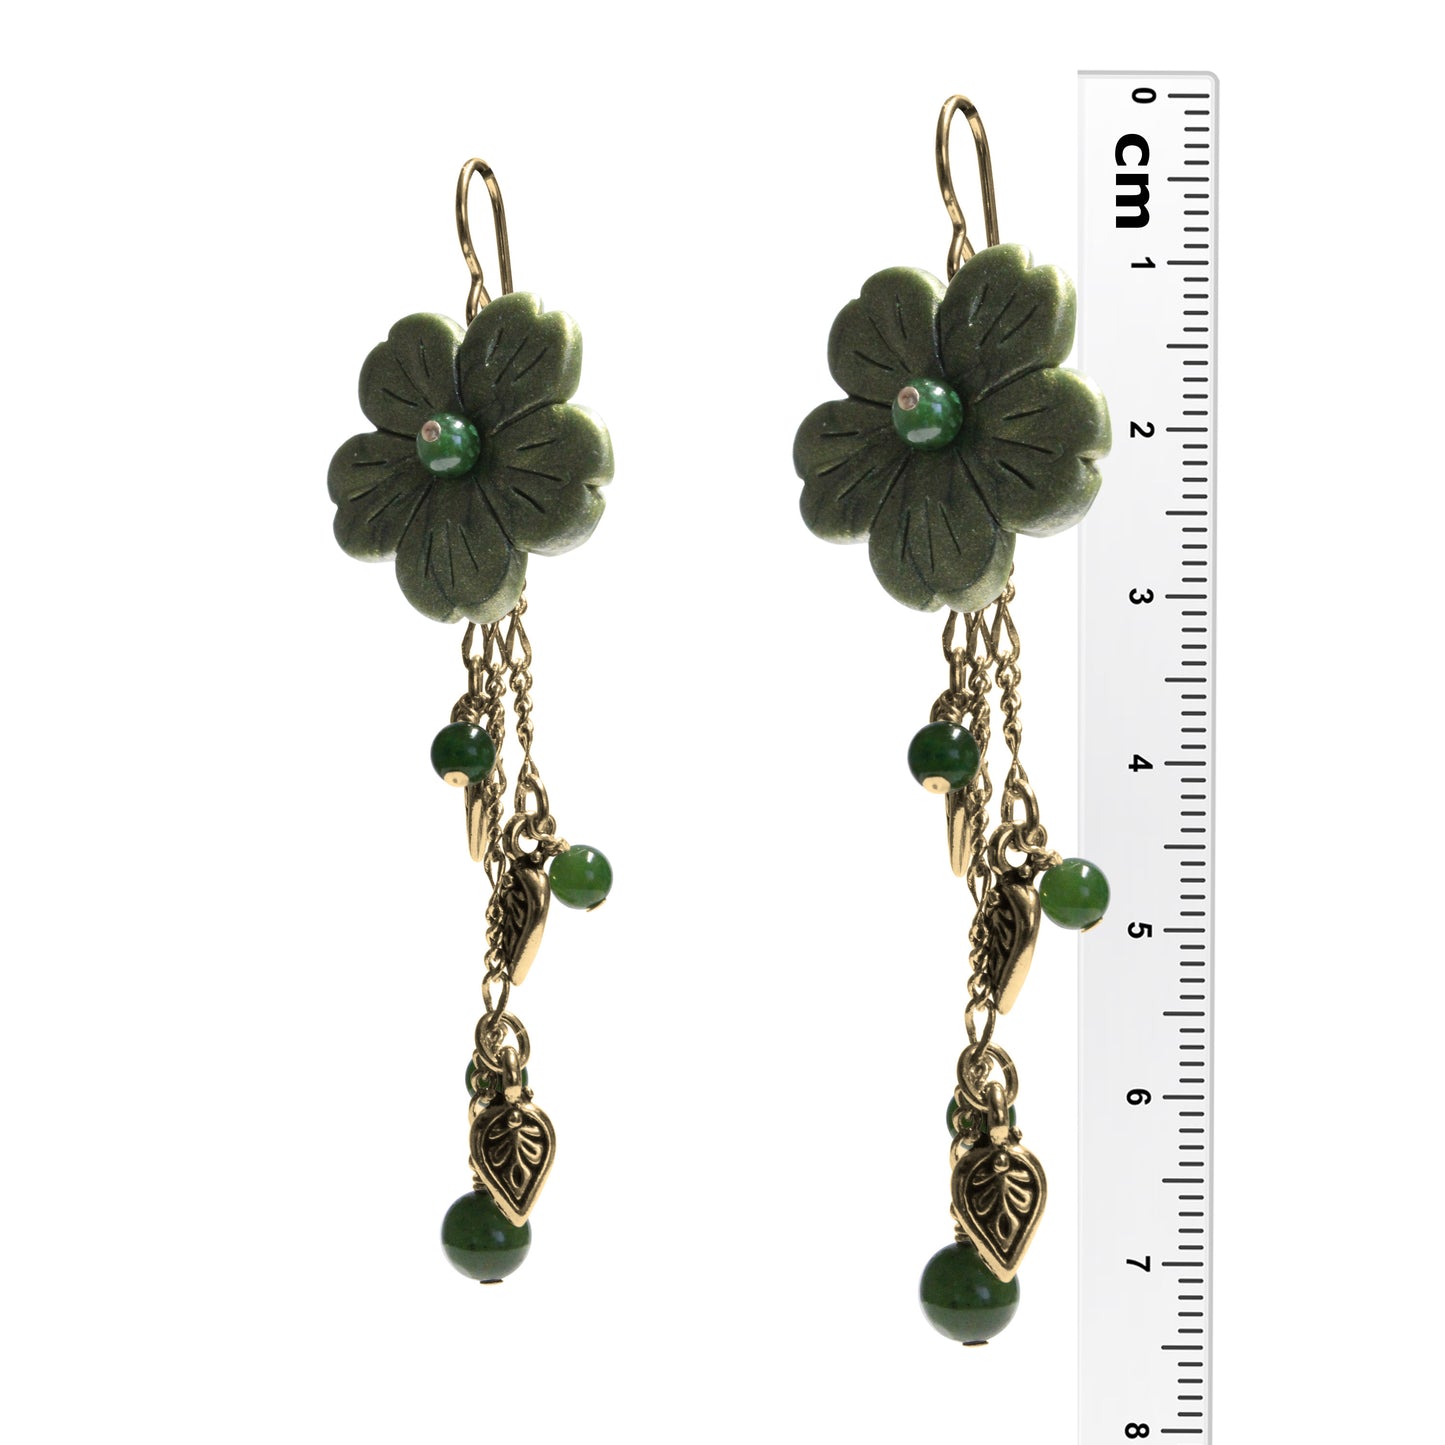 BC Jade Flower Cascade Earrings / 75mm length / with gold pewter charms and gold filled earwires